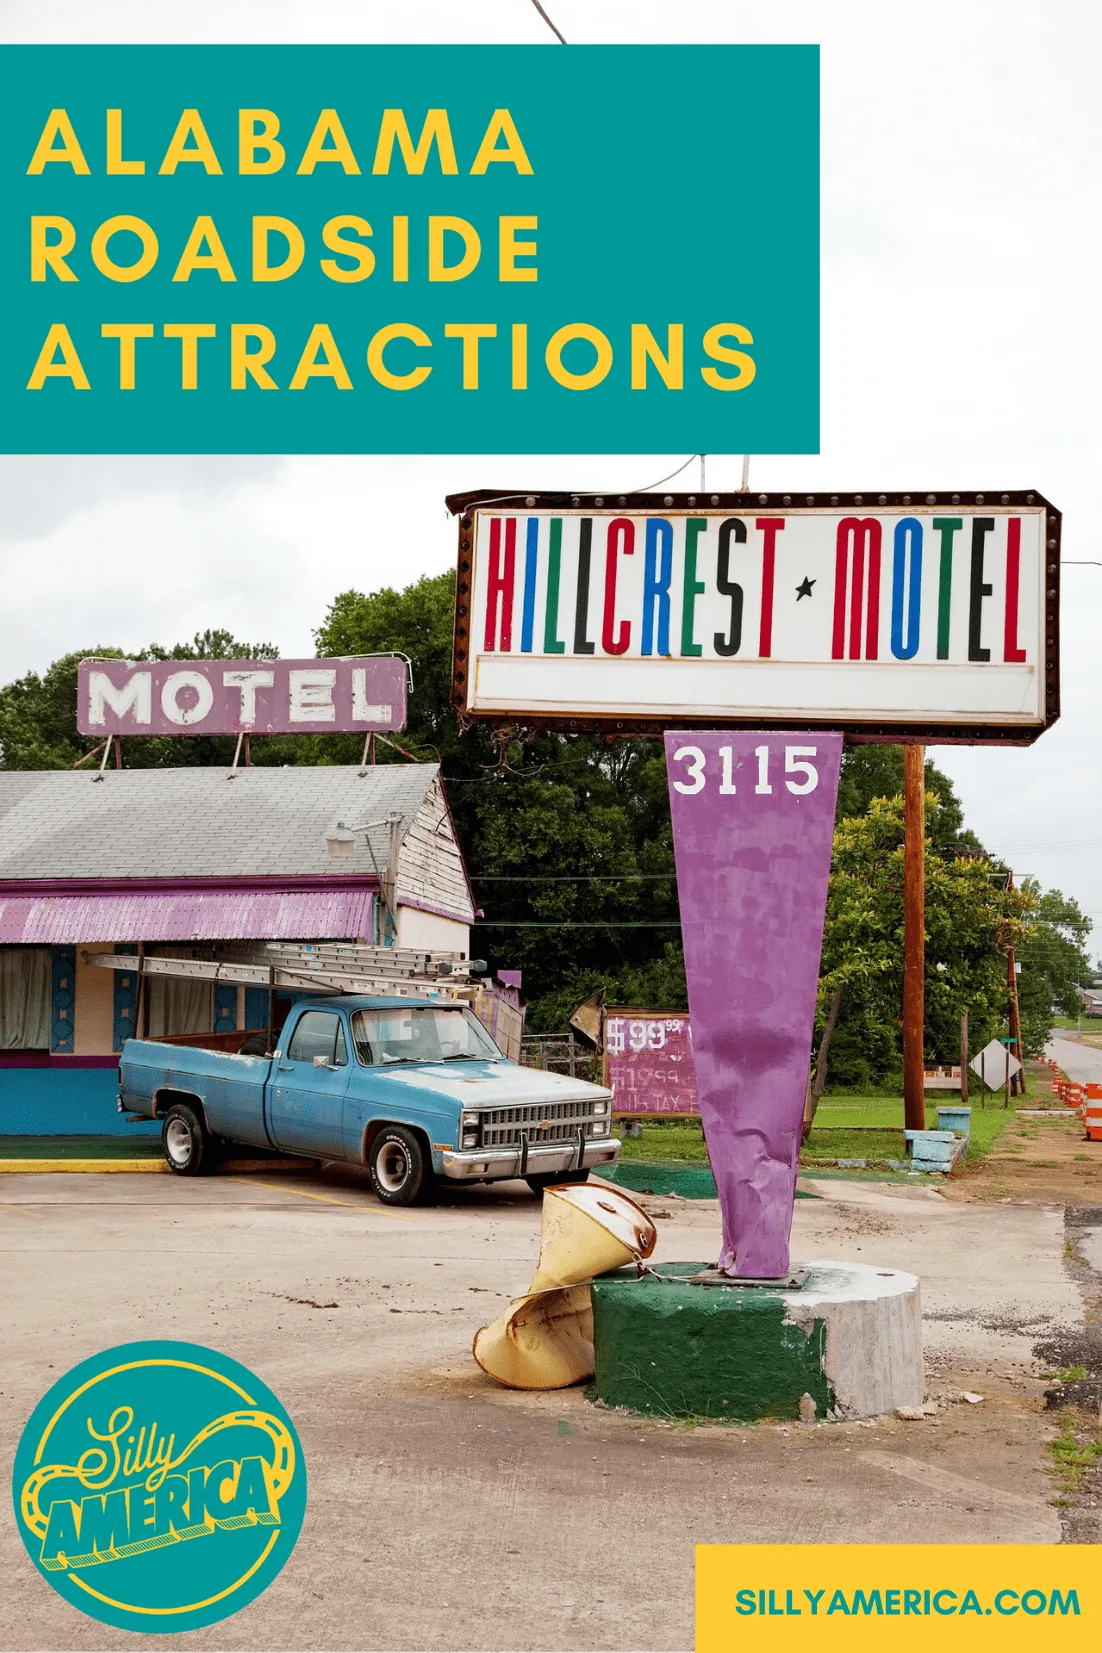 The best Alabama roadside attractions to visit on an Alabama road trip. Add these roadside oddities to your travel bucket list, itinerary, or route map! These places to visit in Alabama are fun road trip stops for kids or adults! #Alabama #AlabamaRoadTrip #AlabamaRoadsideAttractions #RoadsideAttractions #RoadsideAttraction #PlacesToVisitInAlabama #AlabamaRoadTripIdeas #RoadTrip #RoadTrips #AlabamaRoadTripItinerary #WeirdRoadsideAttractions